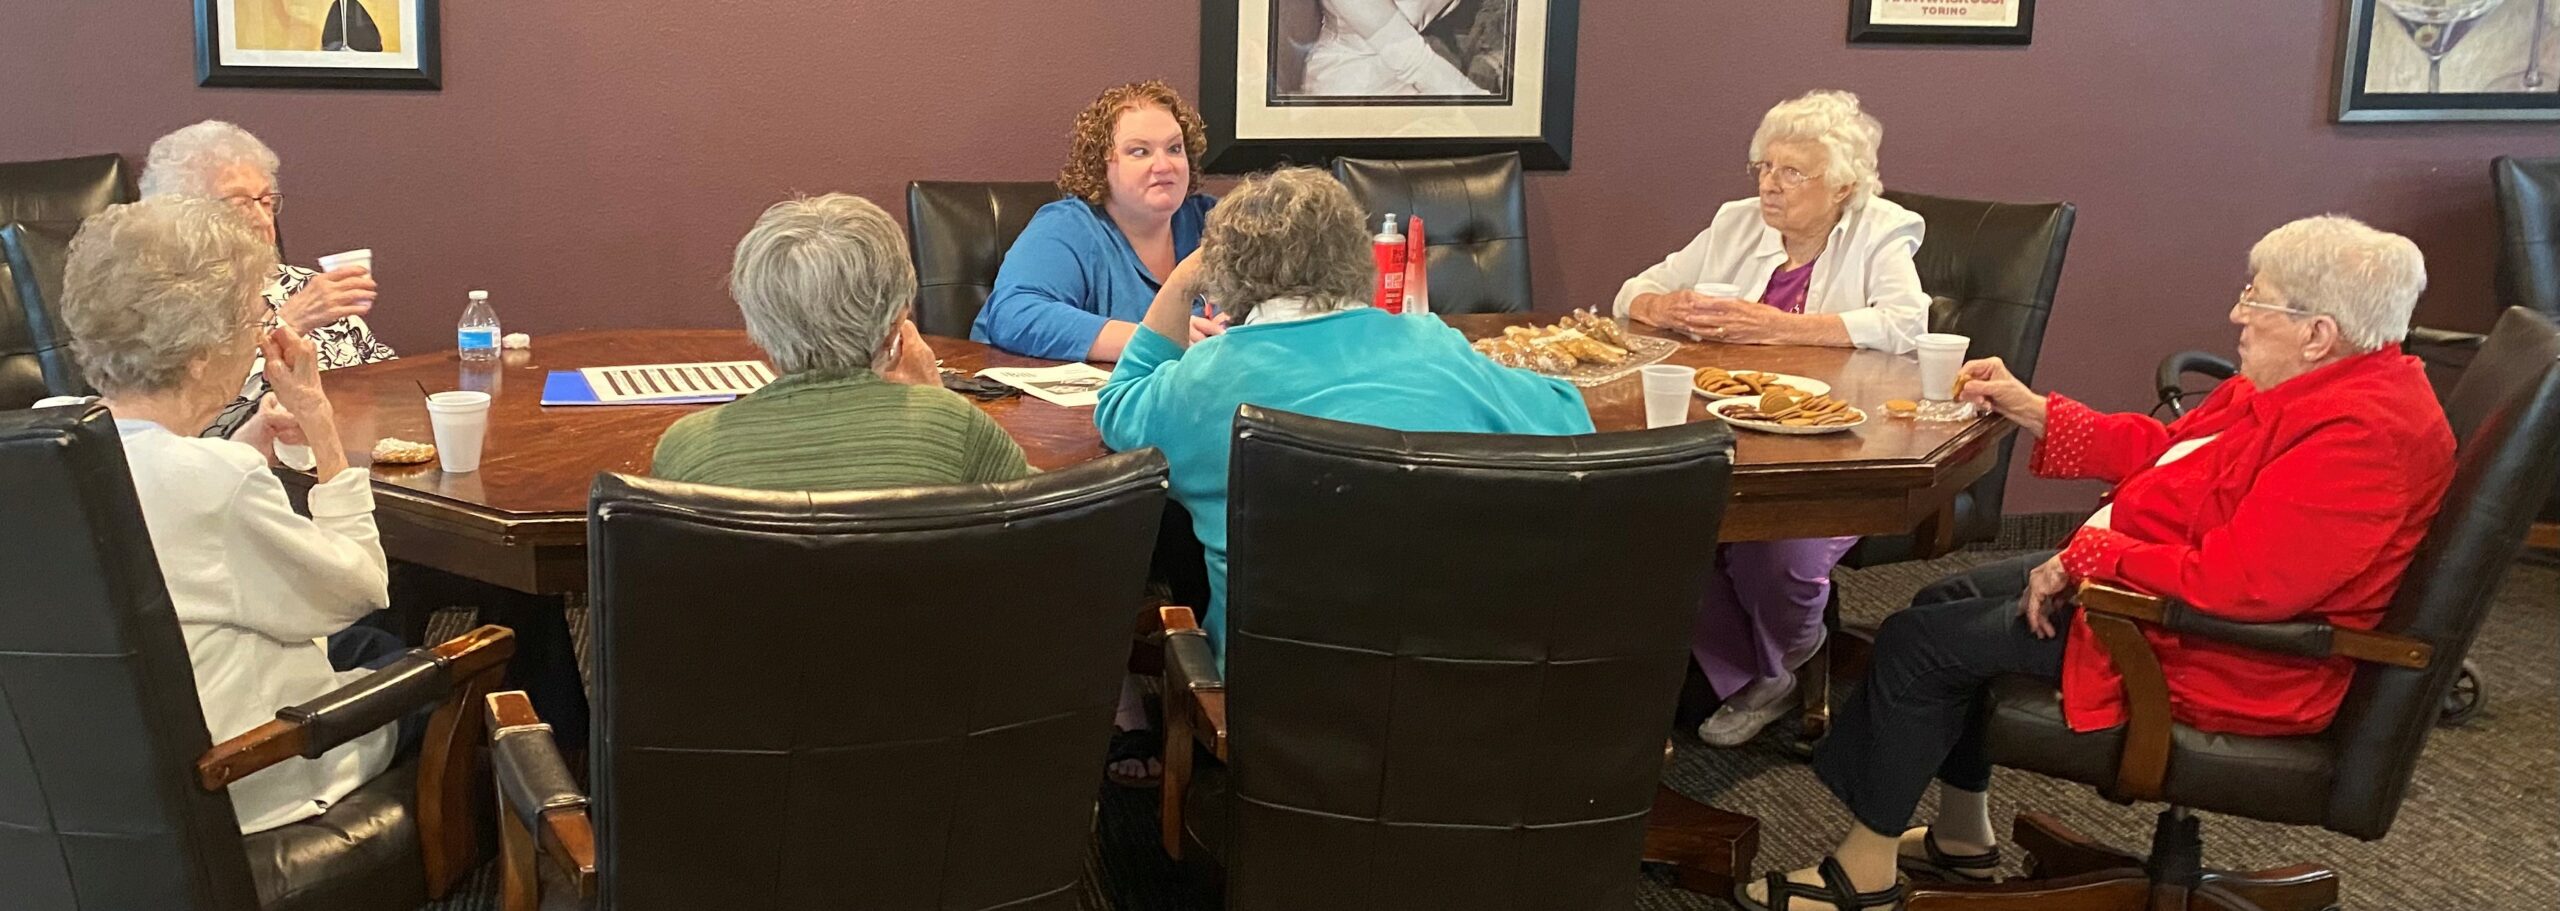 Seven people around an oval table. The woman facing the camera on the far end of the table leads the conversation. The others look a her attentively.